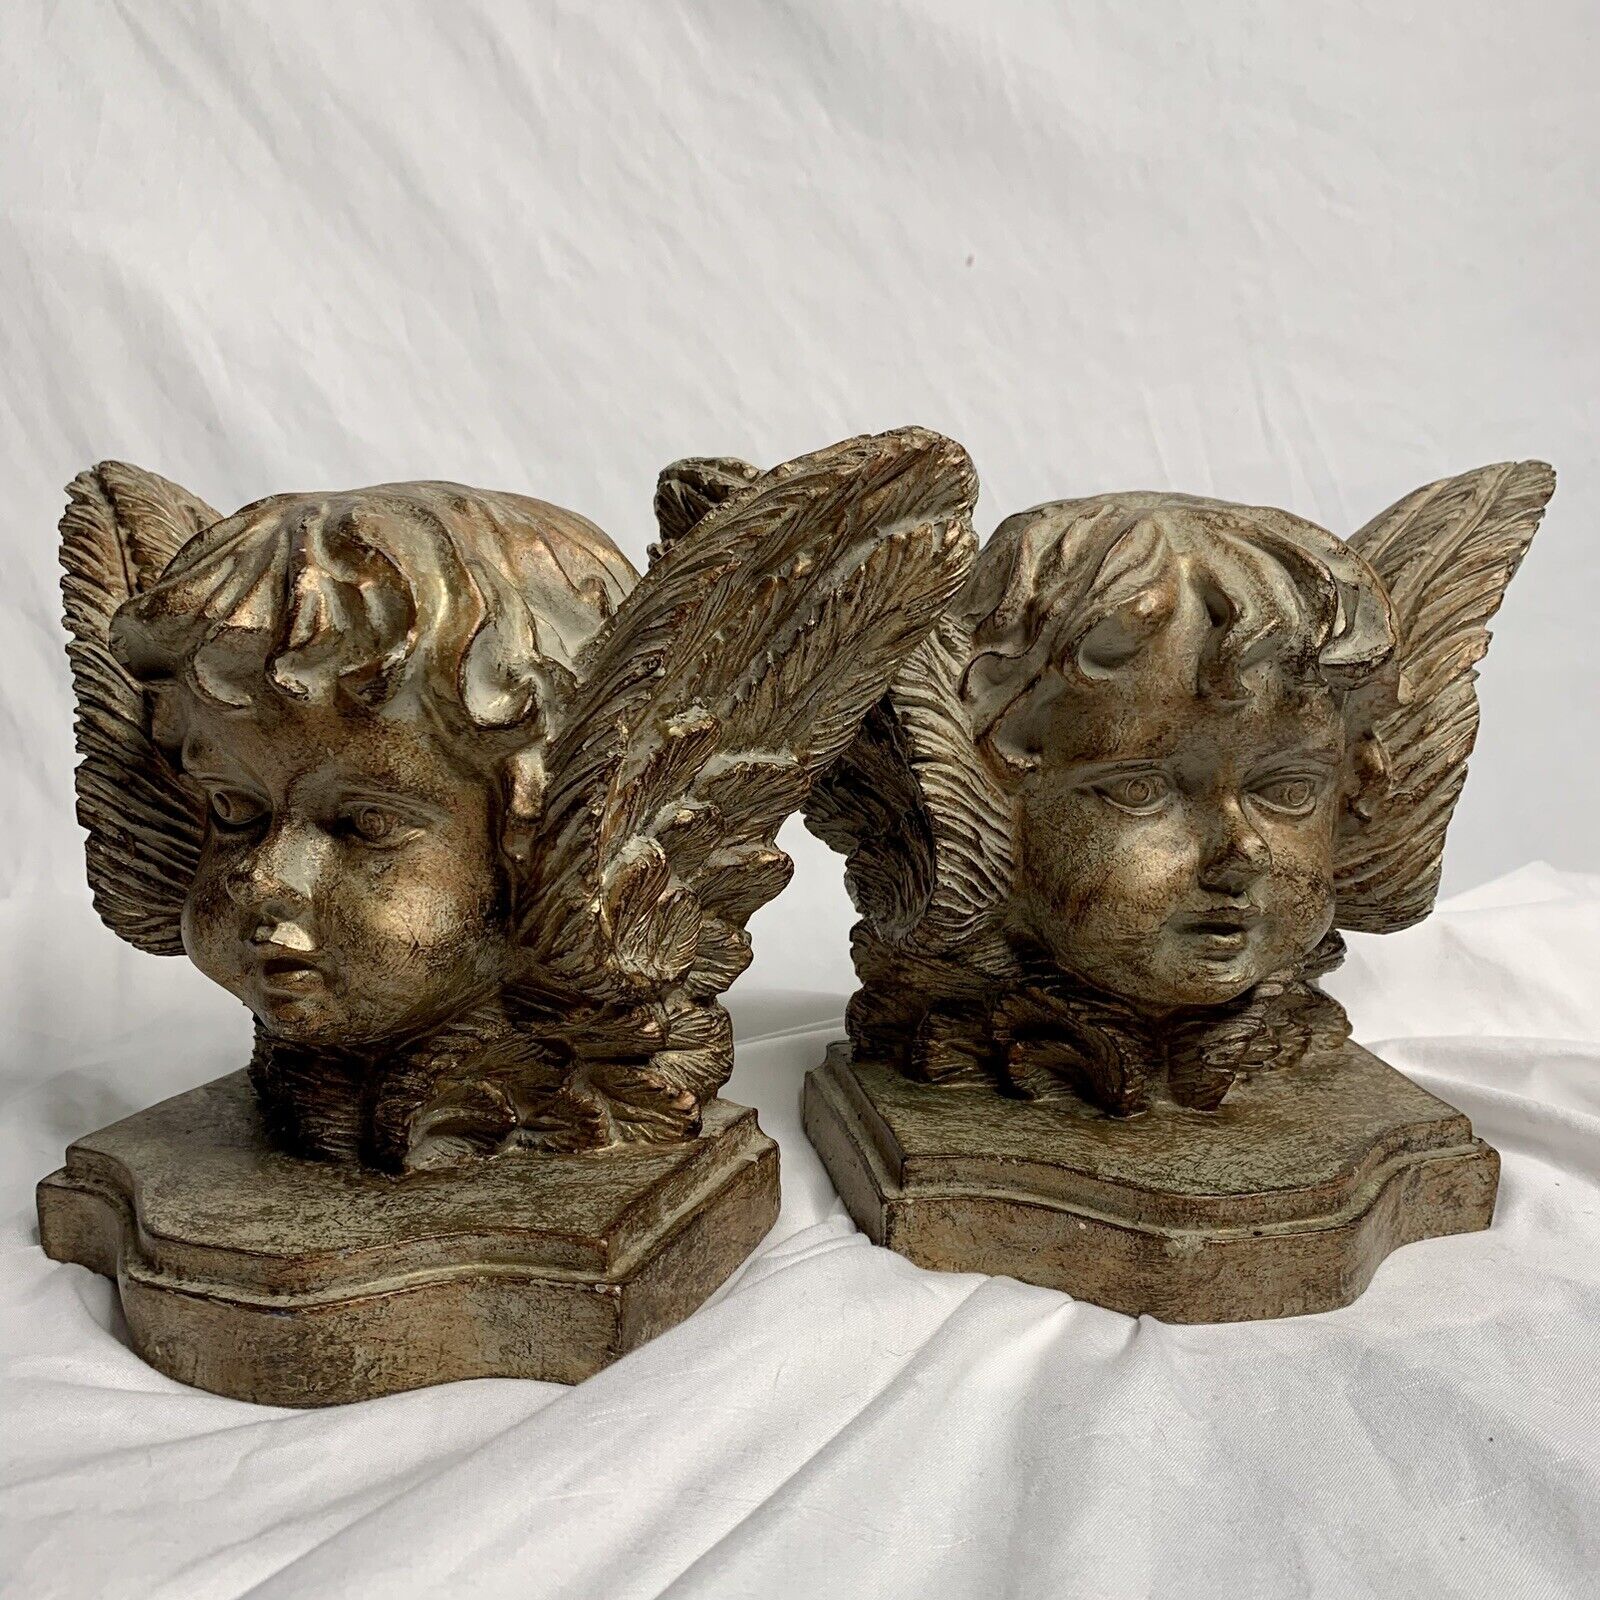 Pair of Heavy Solid Plaster Cherub Bookends - Verde Bust Statue